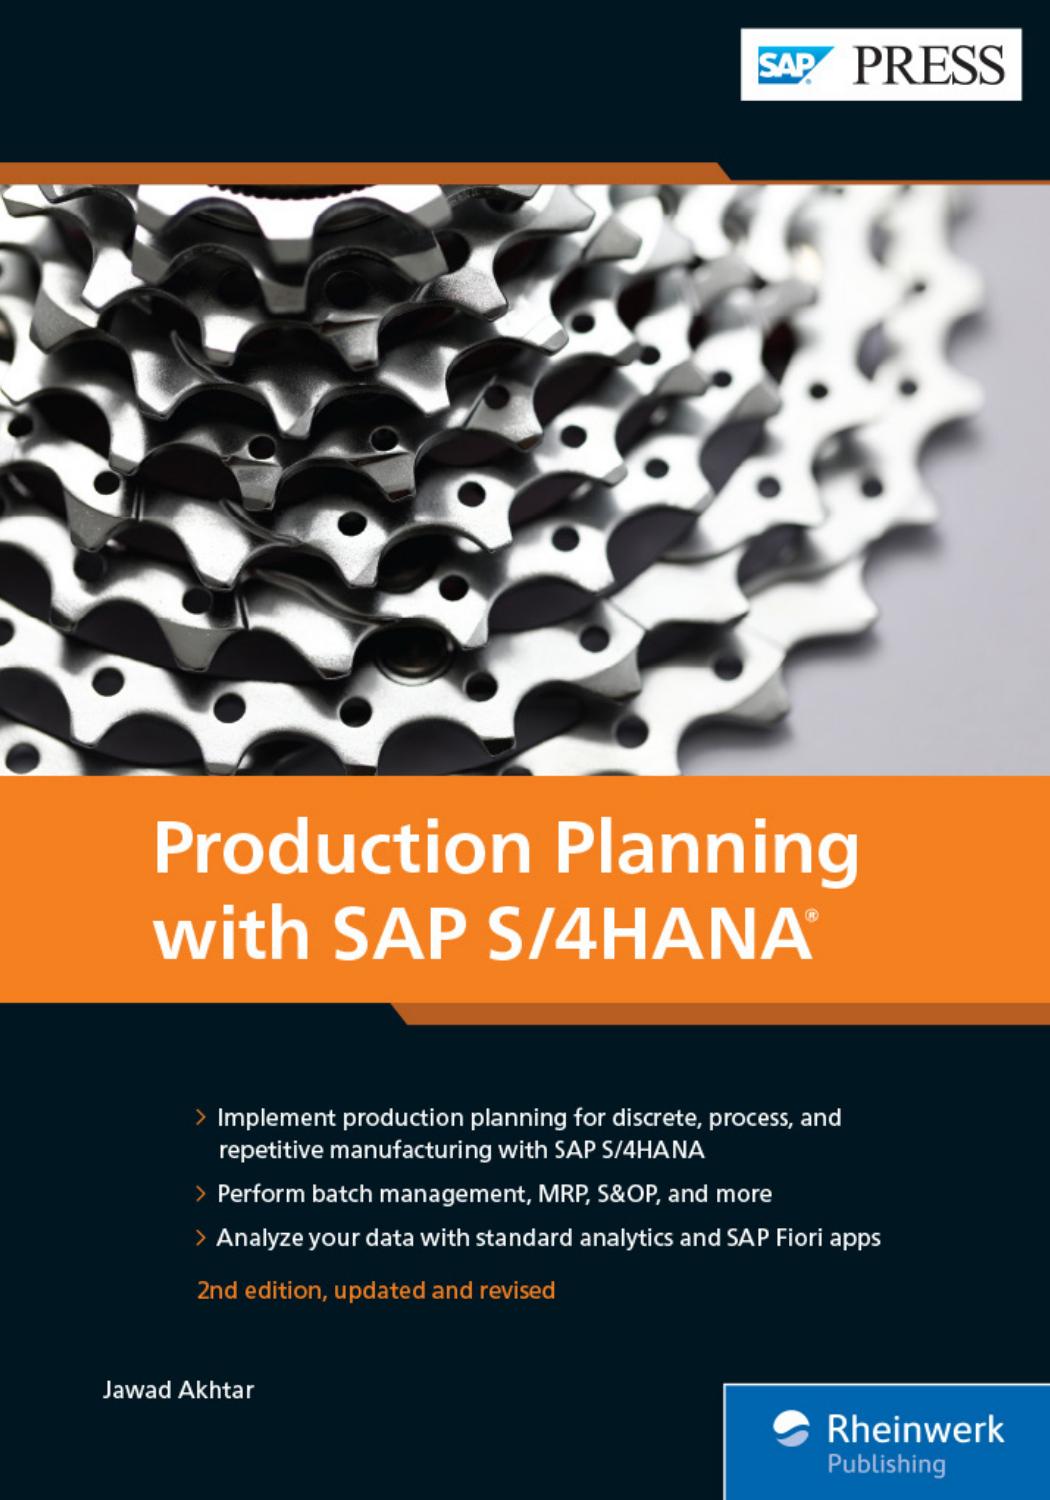 Production Planning with SAP S/4HANA (Second Edition) (SAP PRESS) by Jawad Akhtar